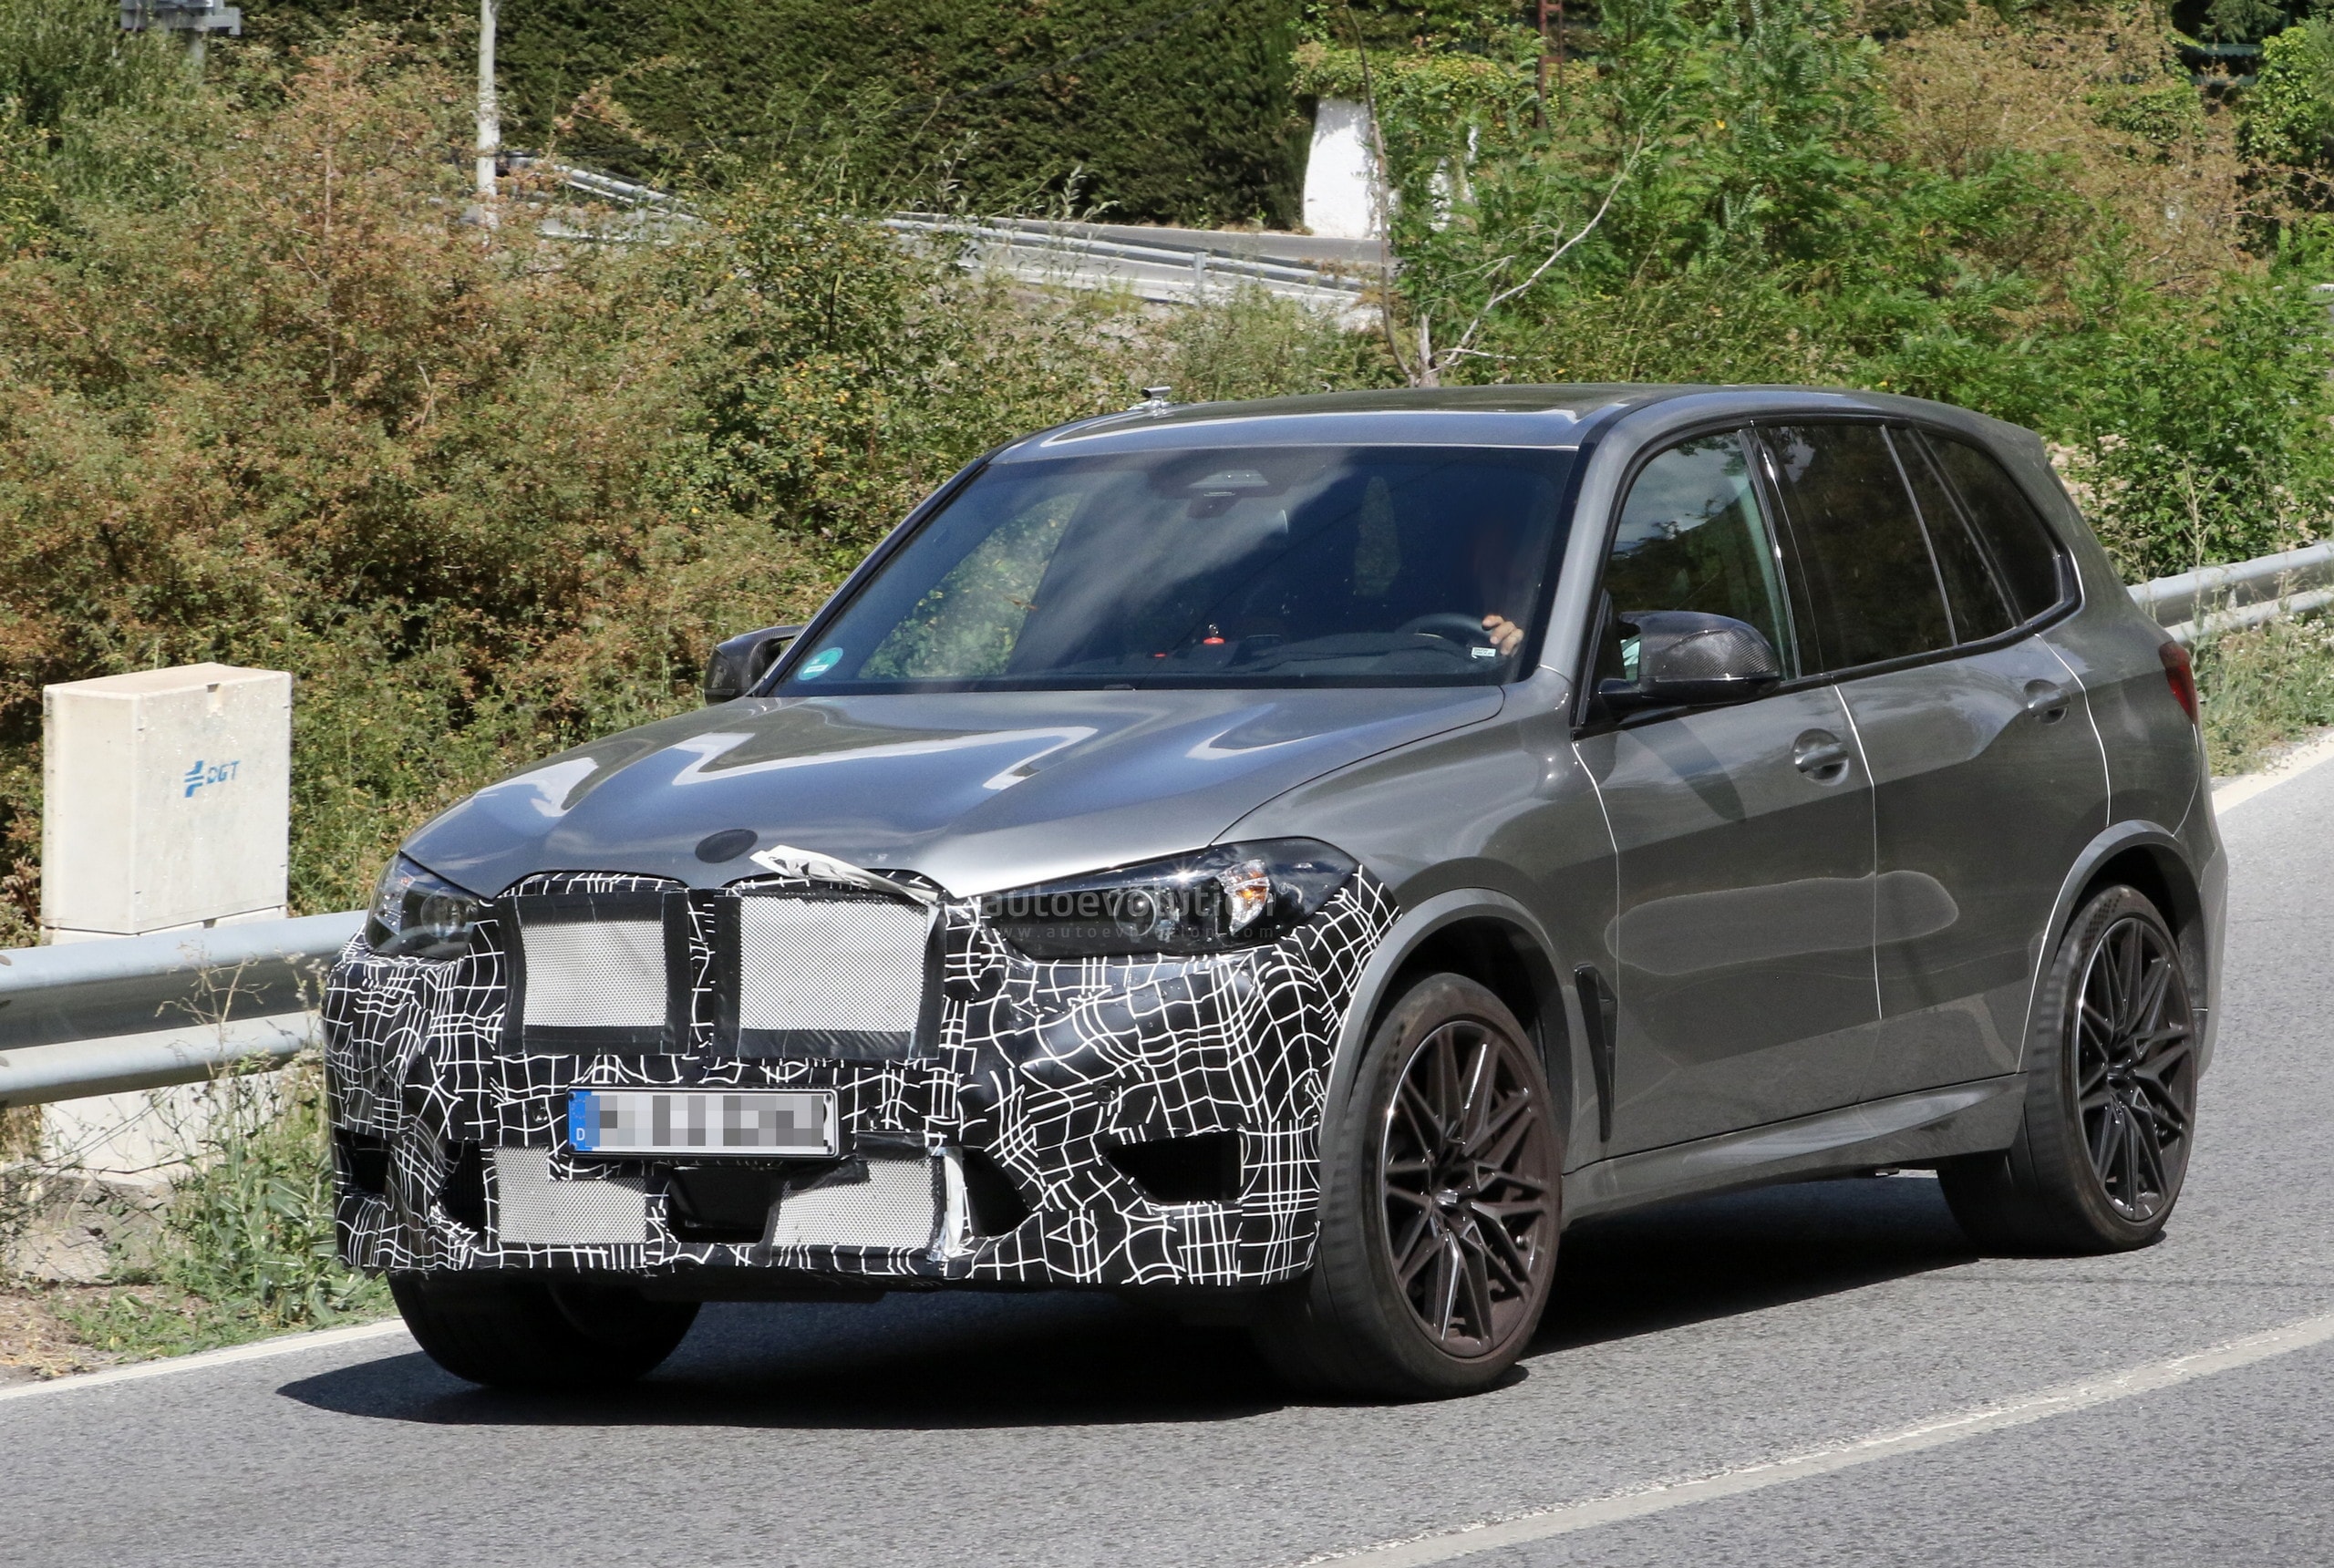 G05 BMW X5 M LCI Makes Surprise Appearance With Almost No Camouflage on